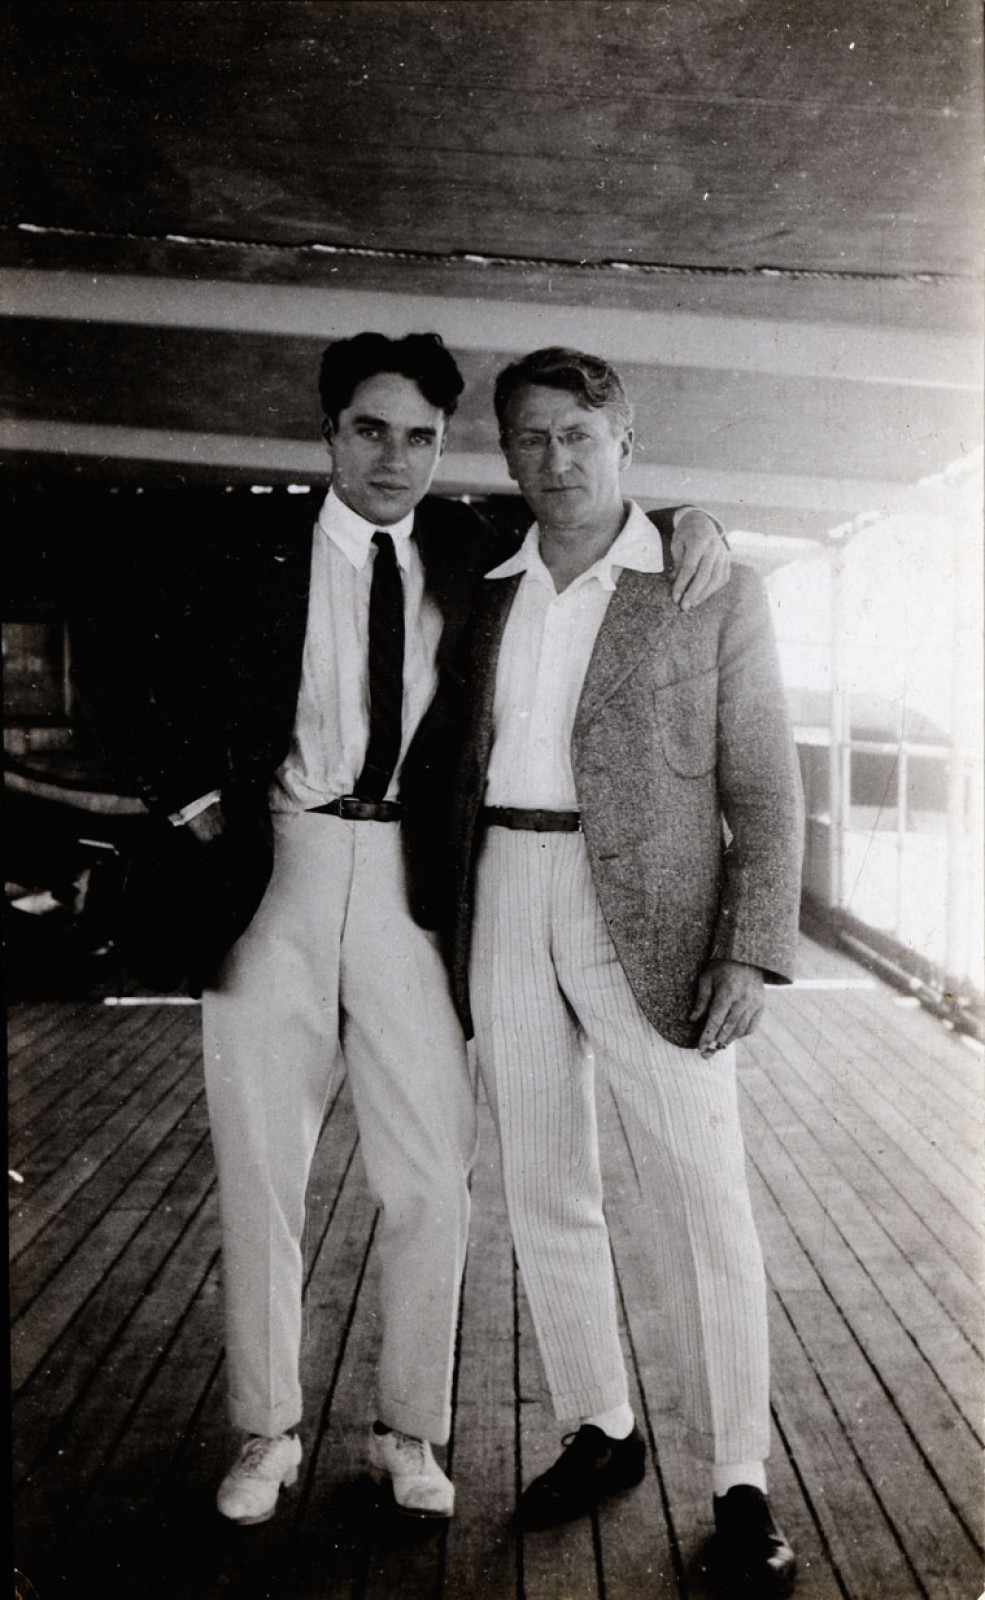 Chaplin posing with Wagner on the deck of a ship, 1917 / ECCI00027805